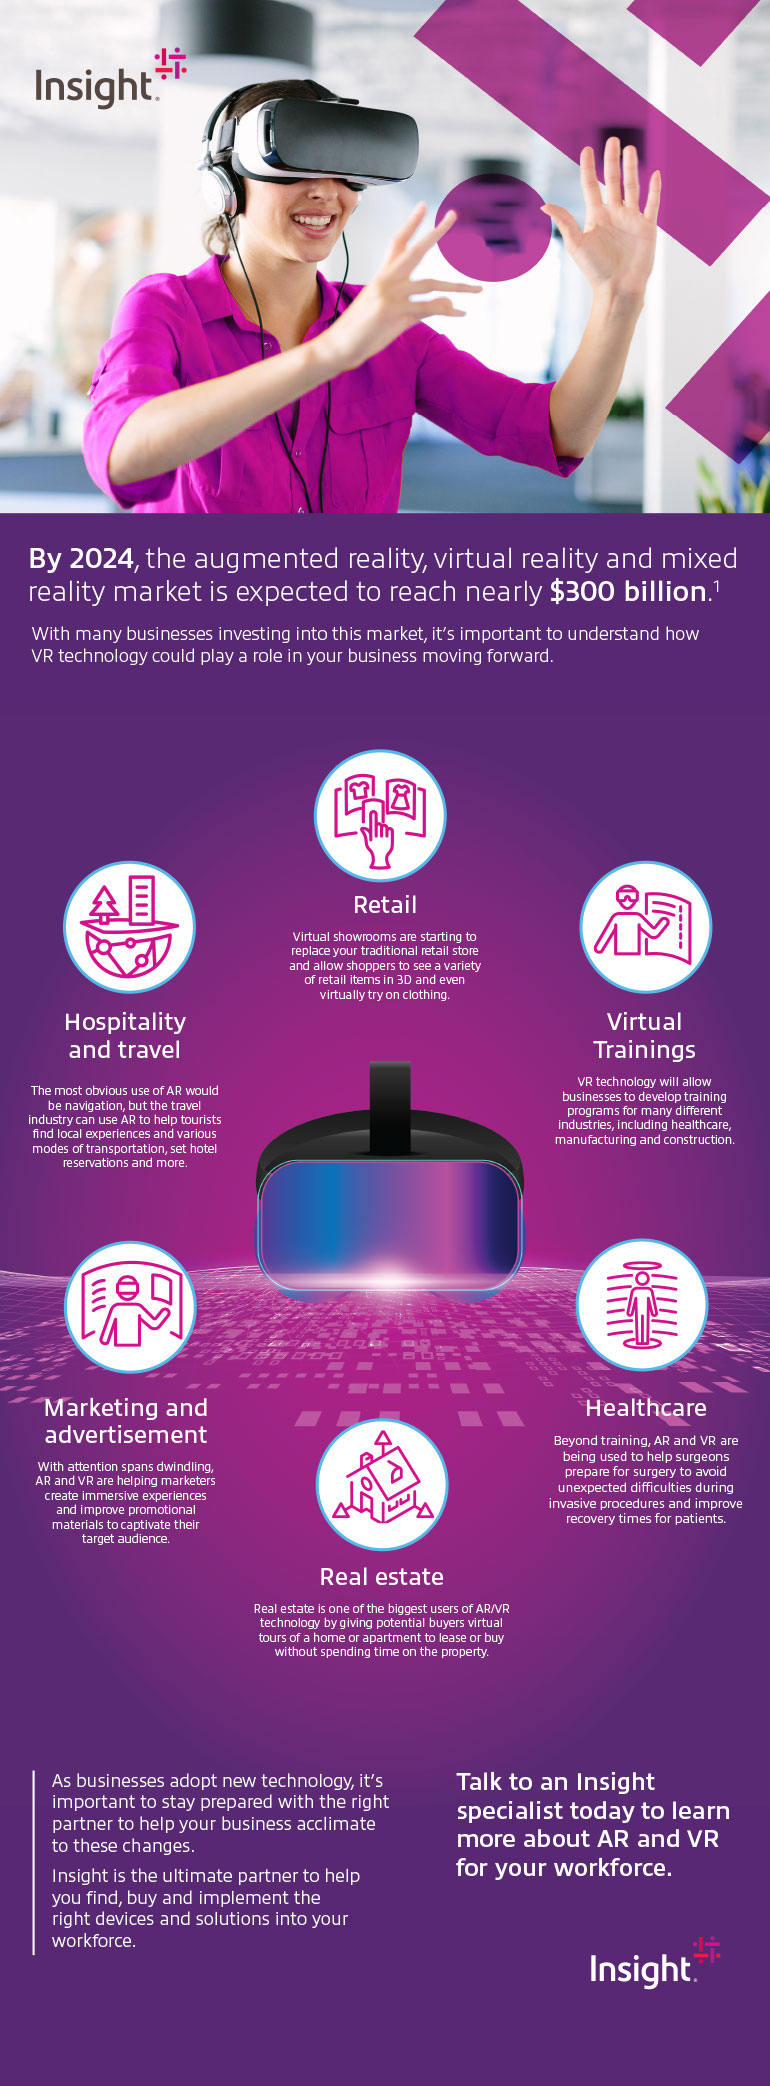 AR and VR Business Applications in 2023 and Beyond infographic